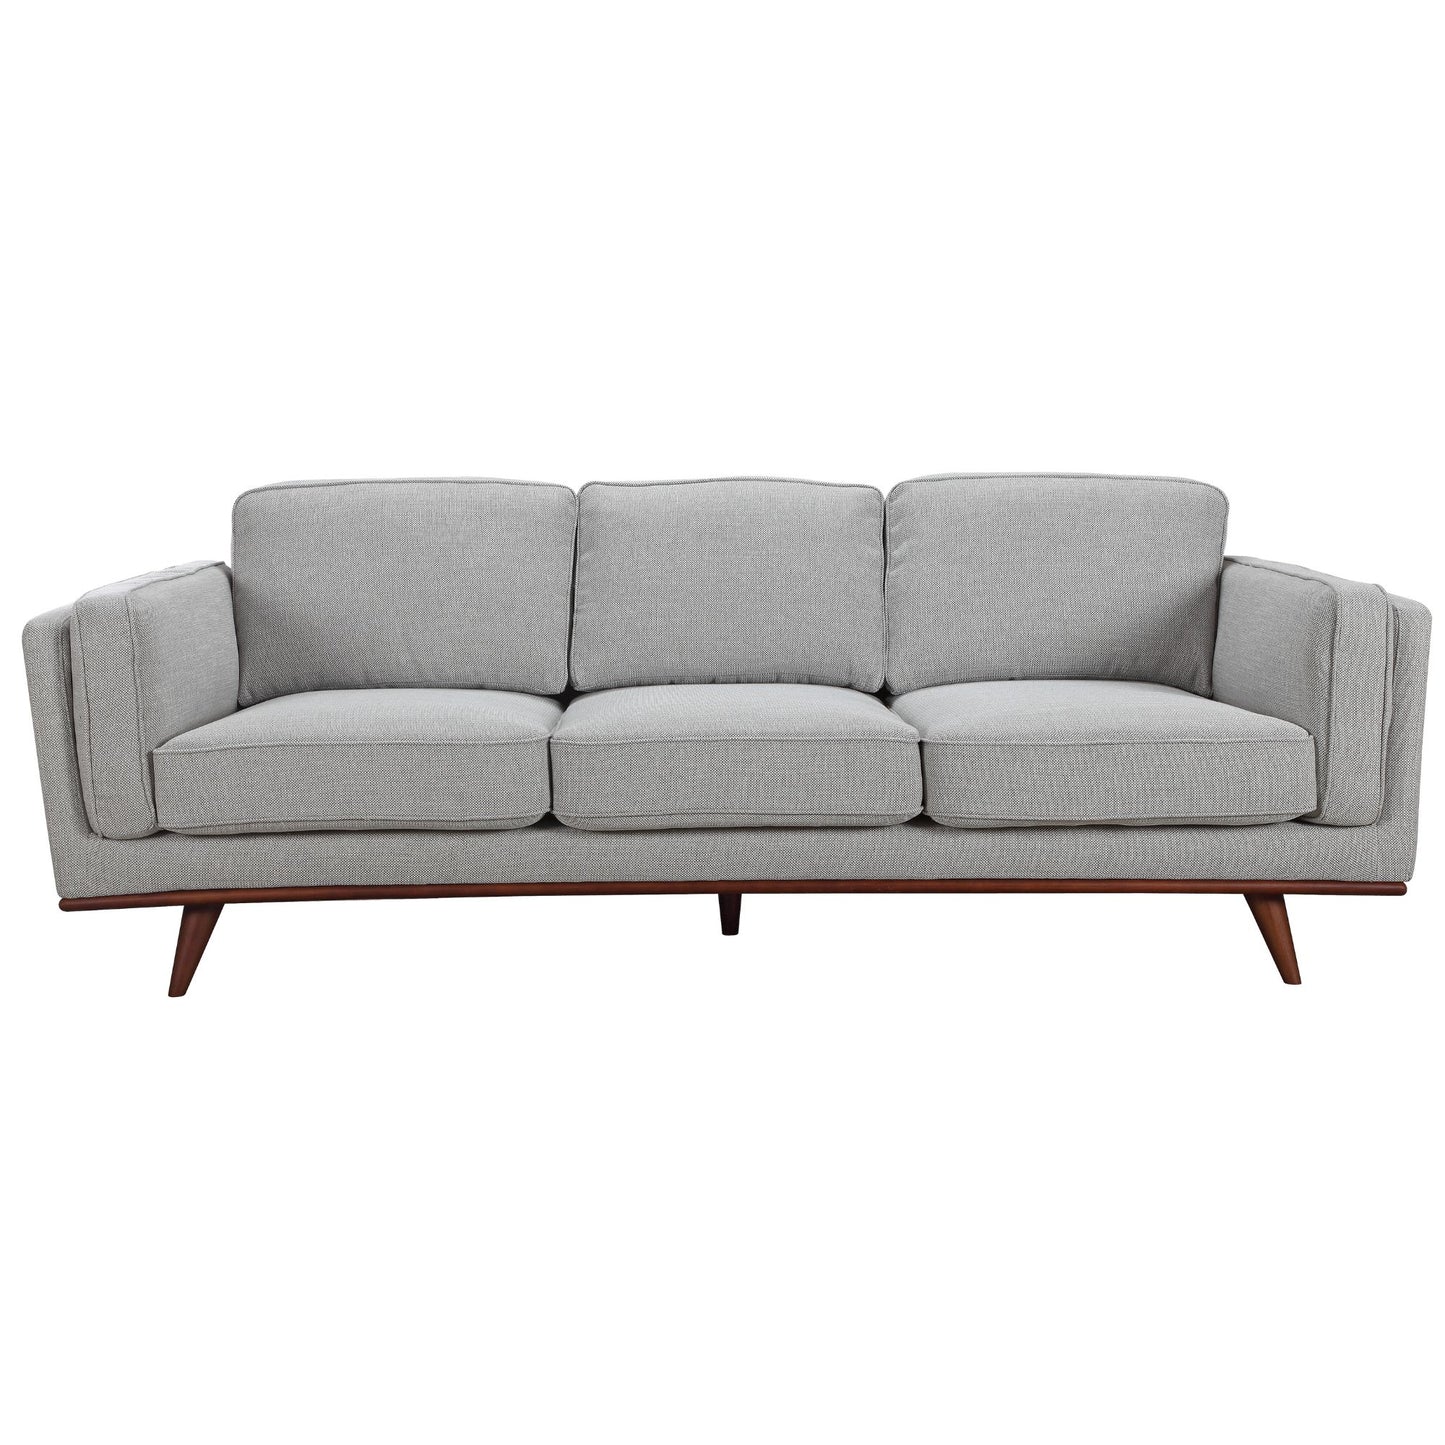 Petalsoft 3 Seater Couch - Grey